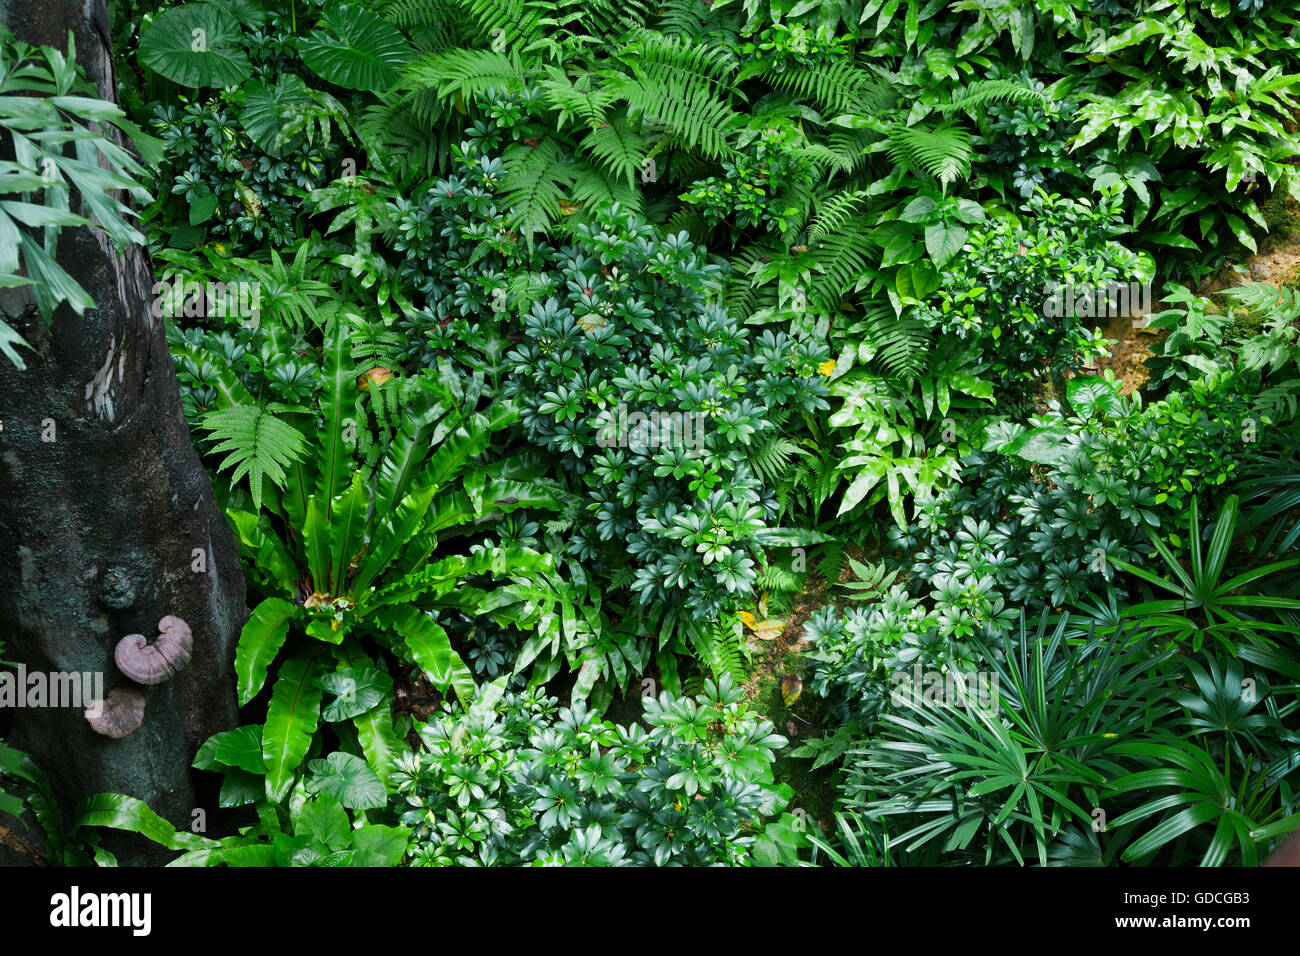 Lush Tropical Green Jungle Stock Photo, Picture and Royalty Free Image.  Image 49556086.